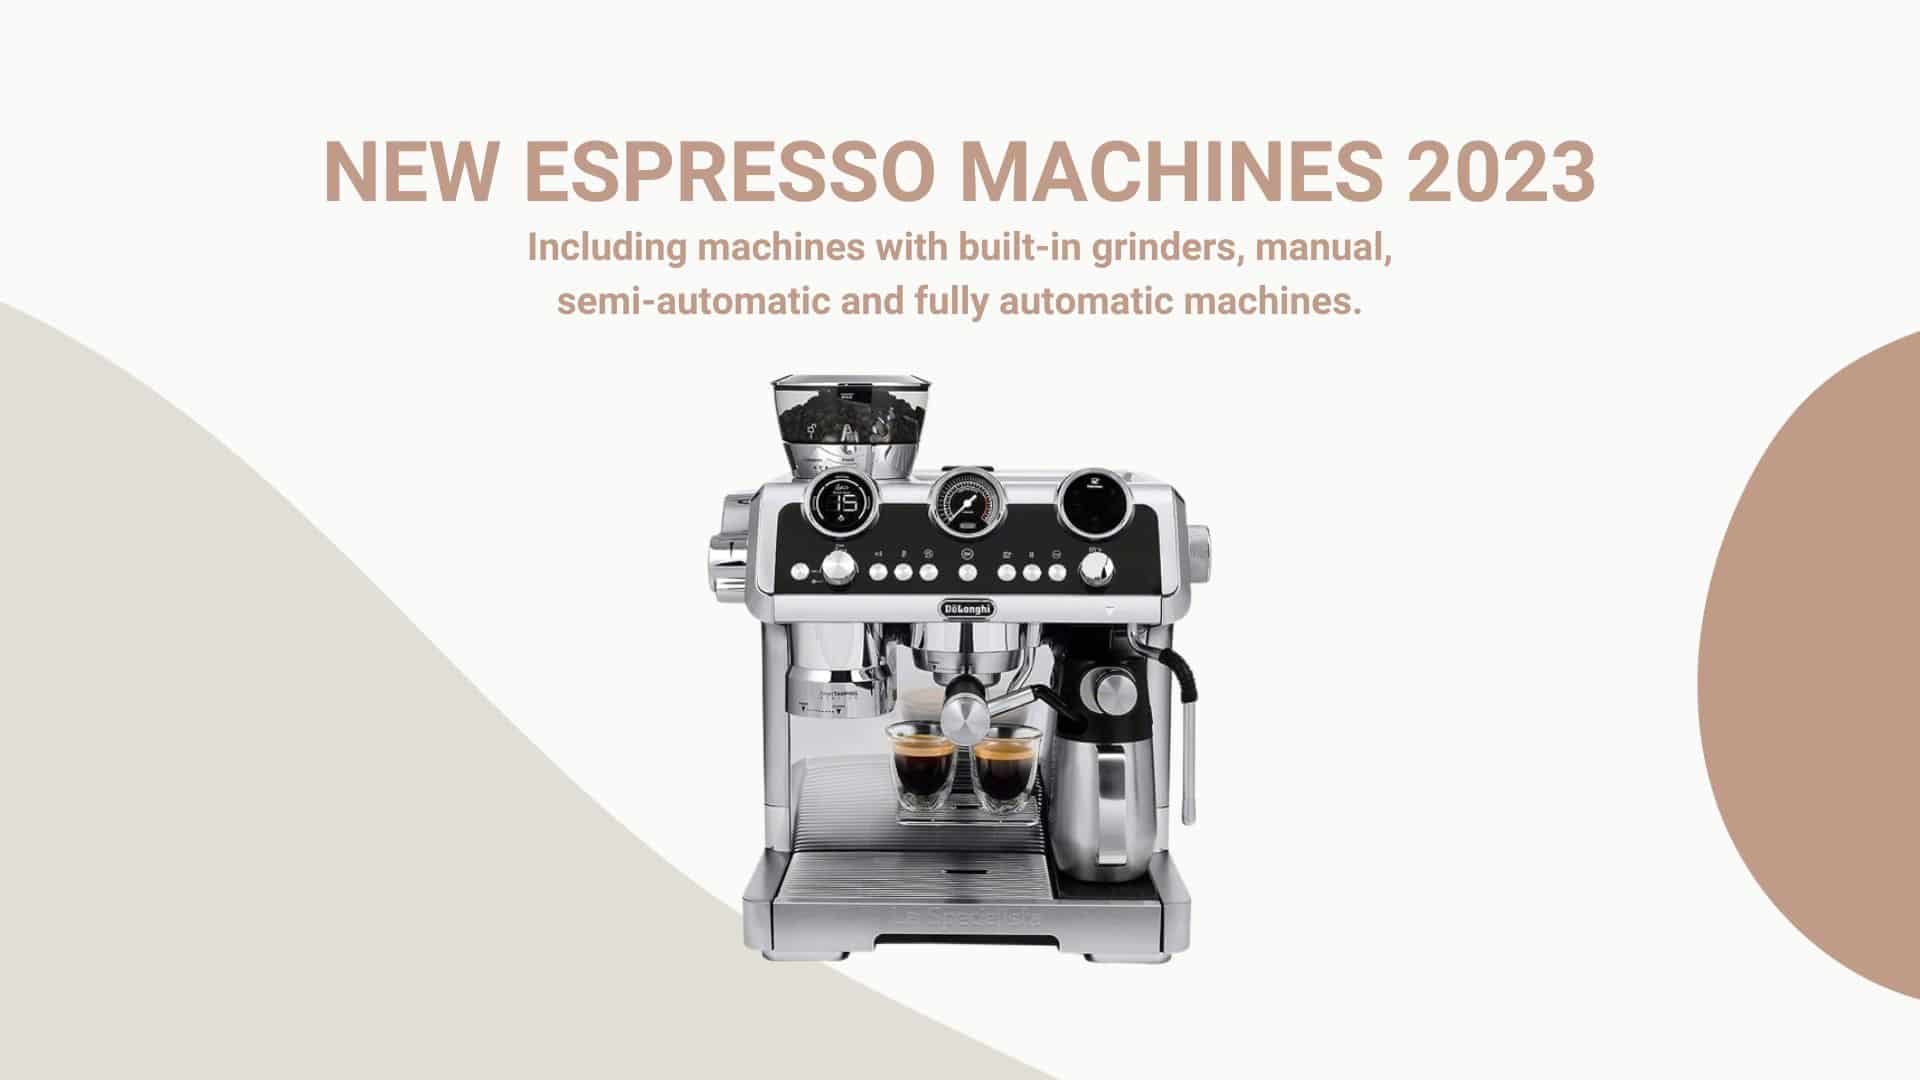 New espresso machines 2023, including machines with built-in grinders, manual, semi-automatic and fully automatic coffee machines